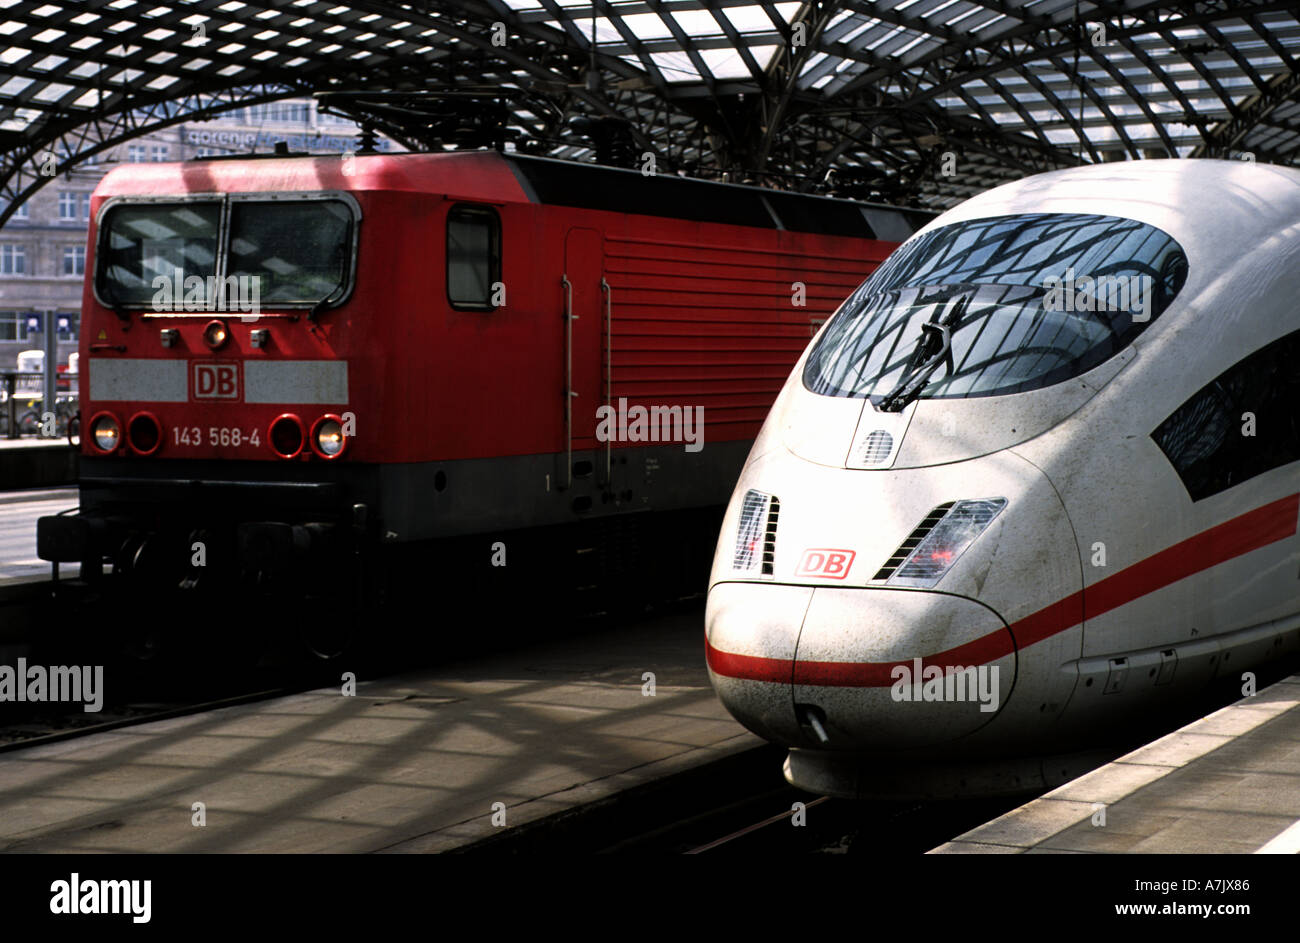 German Railways ICE (Intercity Express) and RE (Regional Express) passenger trains, Cologne, Germany. Stock Photo